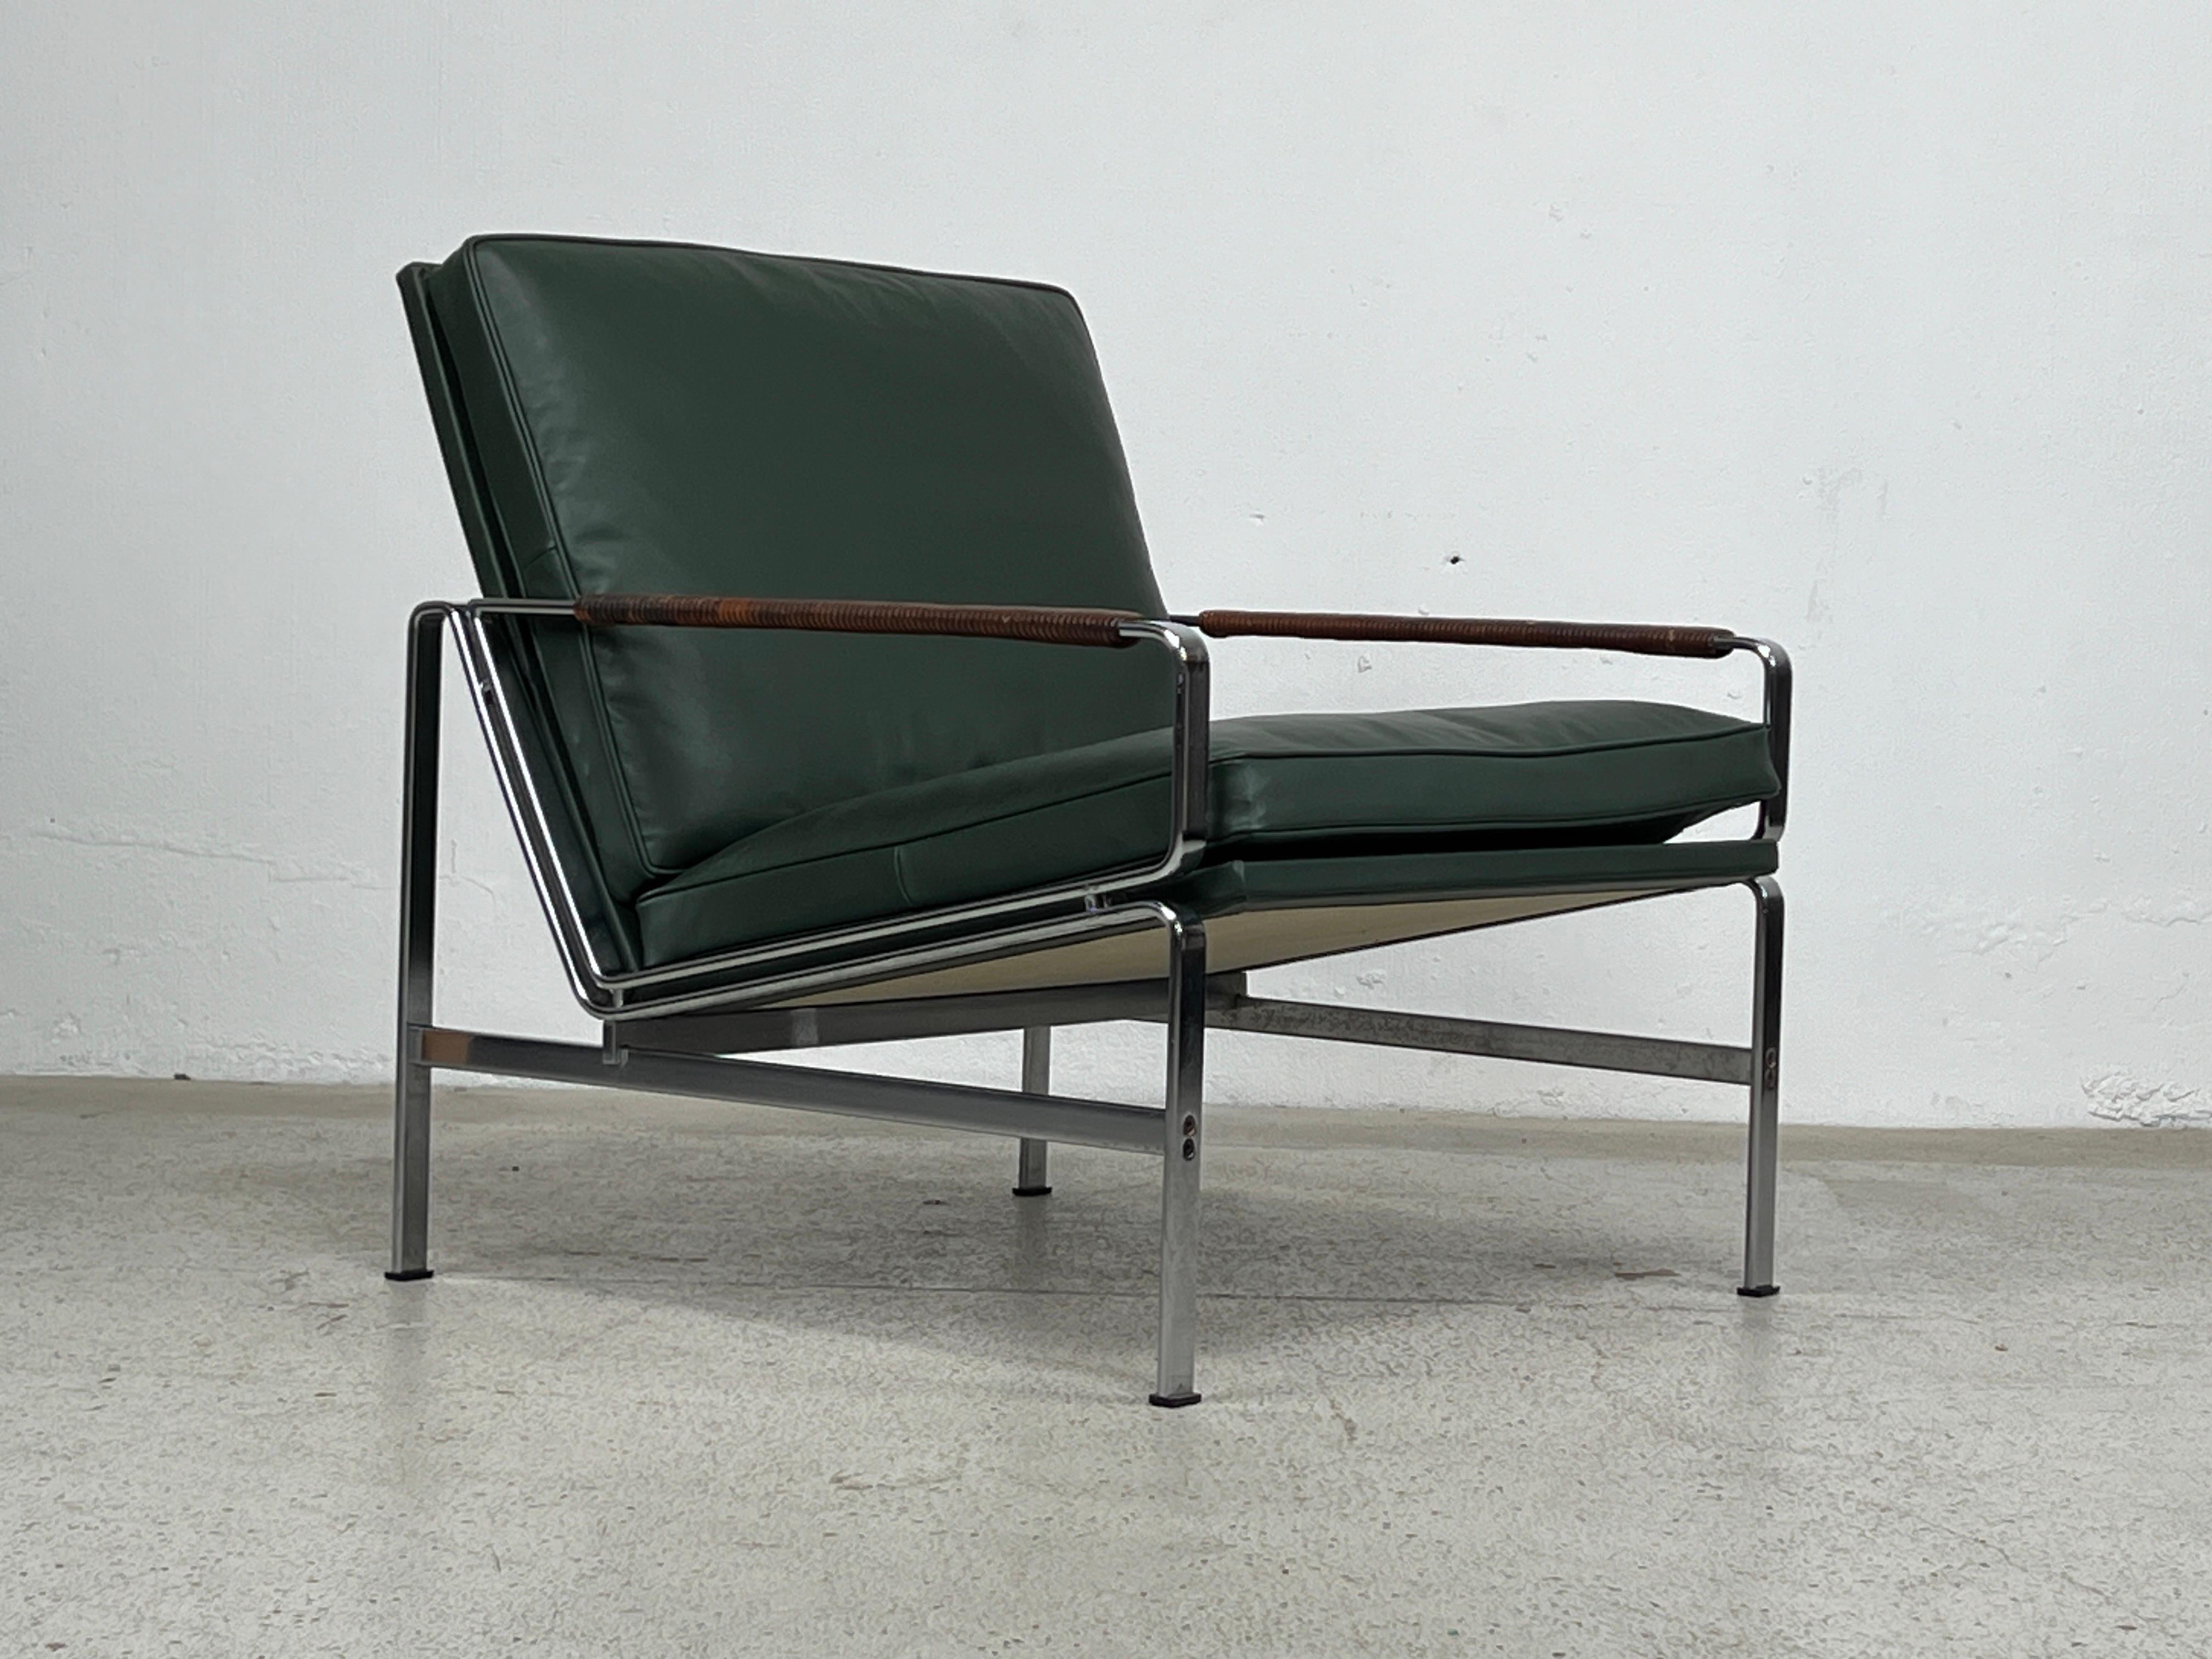 A beautifully designed lounge chair 6720 designed by Preben Fabricius & Jørgen Kastholm and produced by Alfred Kill International, Germany 1968. Perfectly reupholstered in green leather with original patinated leather wrapped arms. 